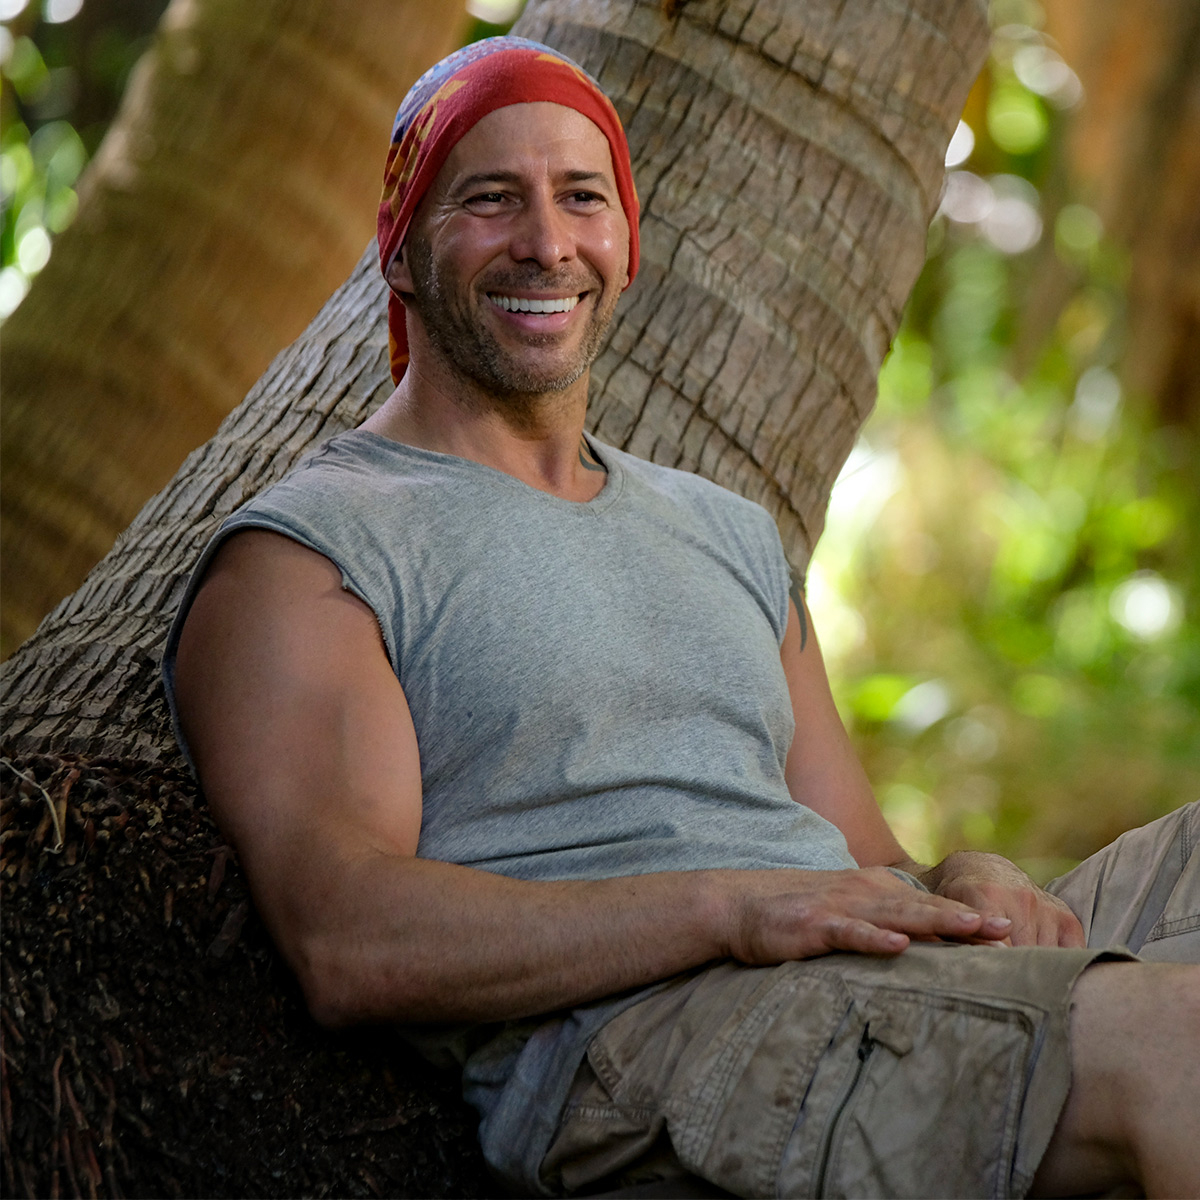 Survivor: Winners at War' Cast Members' Then and Now Photos